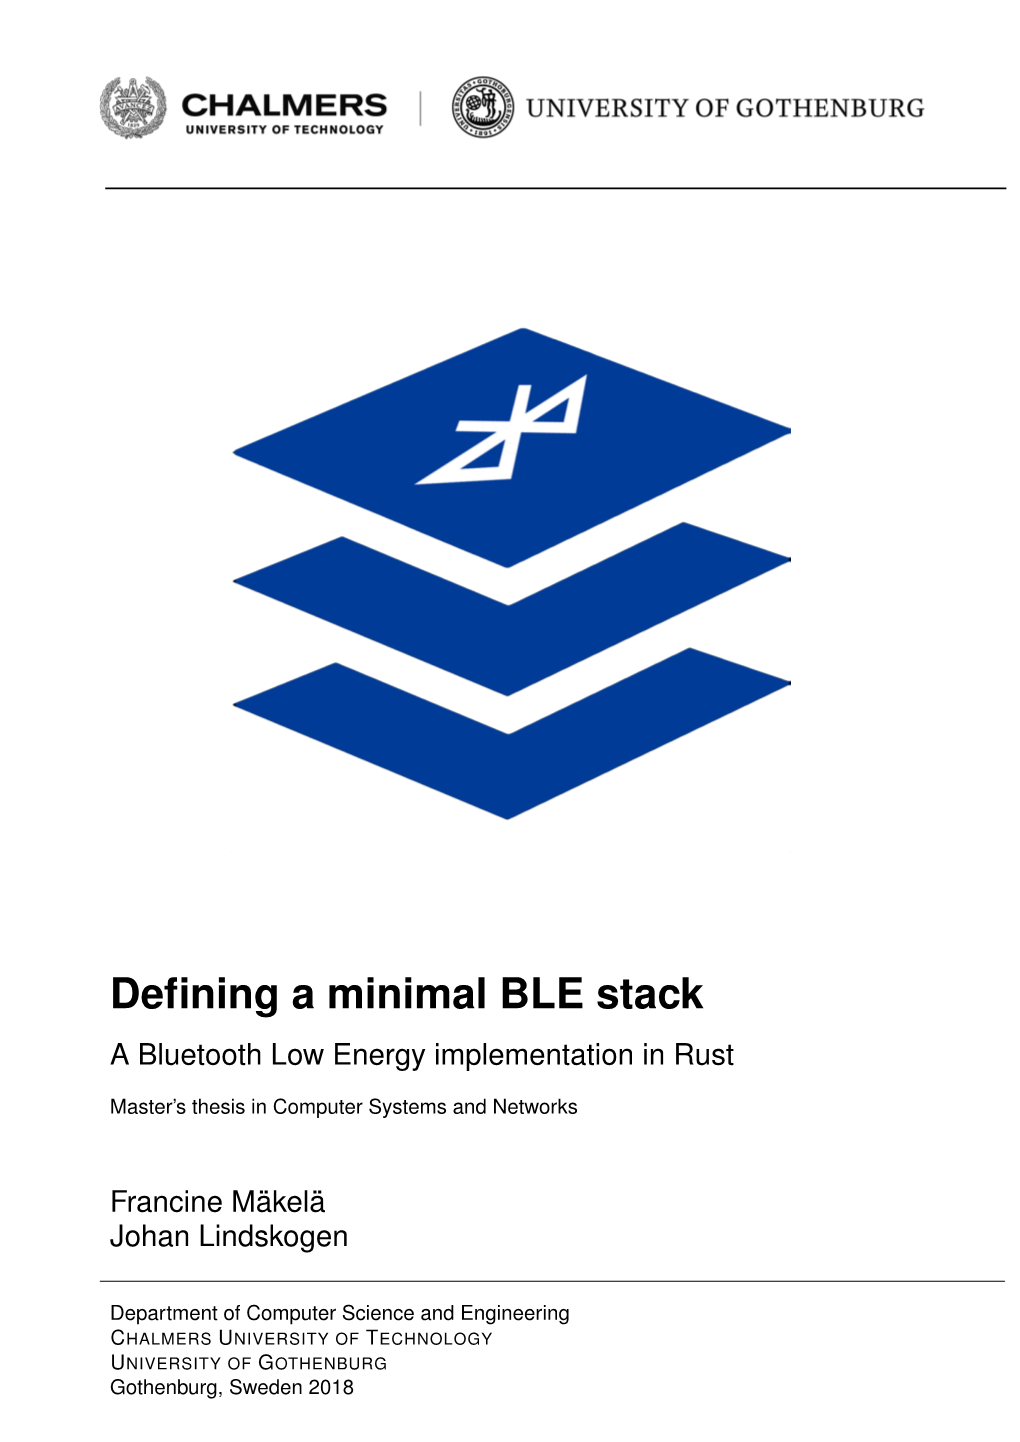 Defining a Minimal BLE Stack